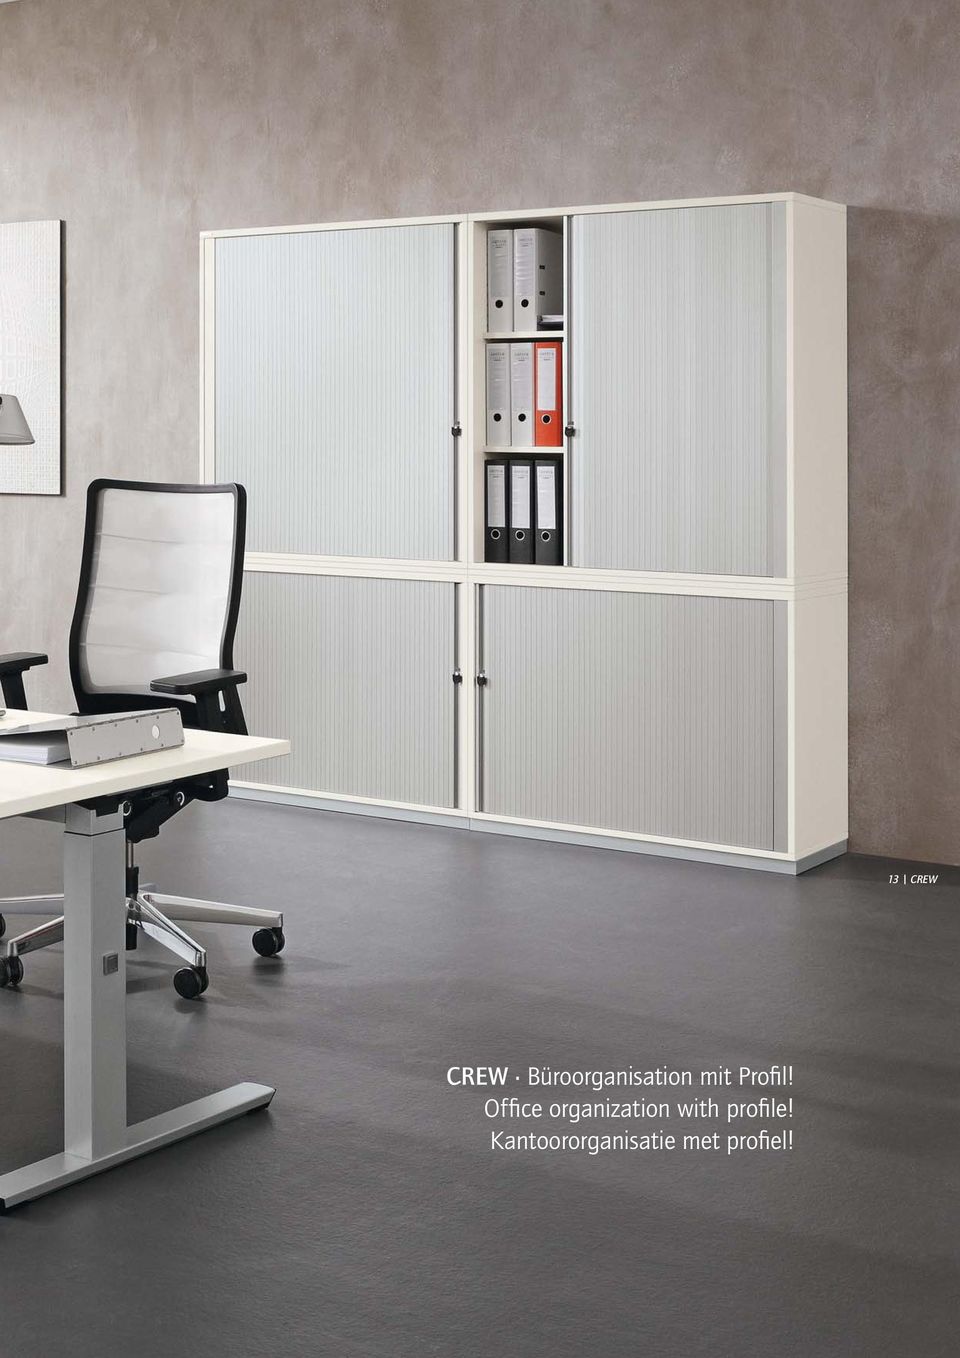 Office organization with